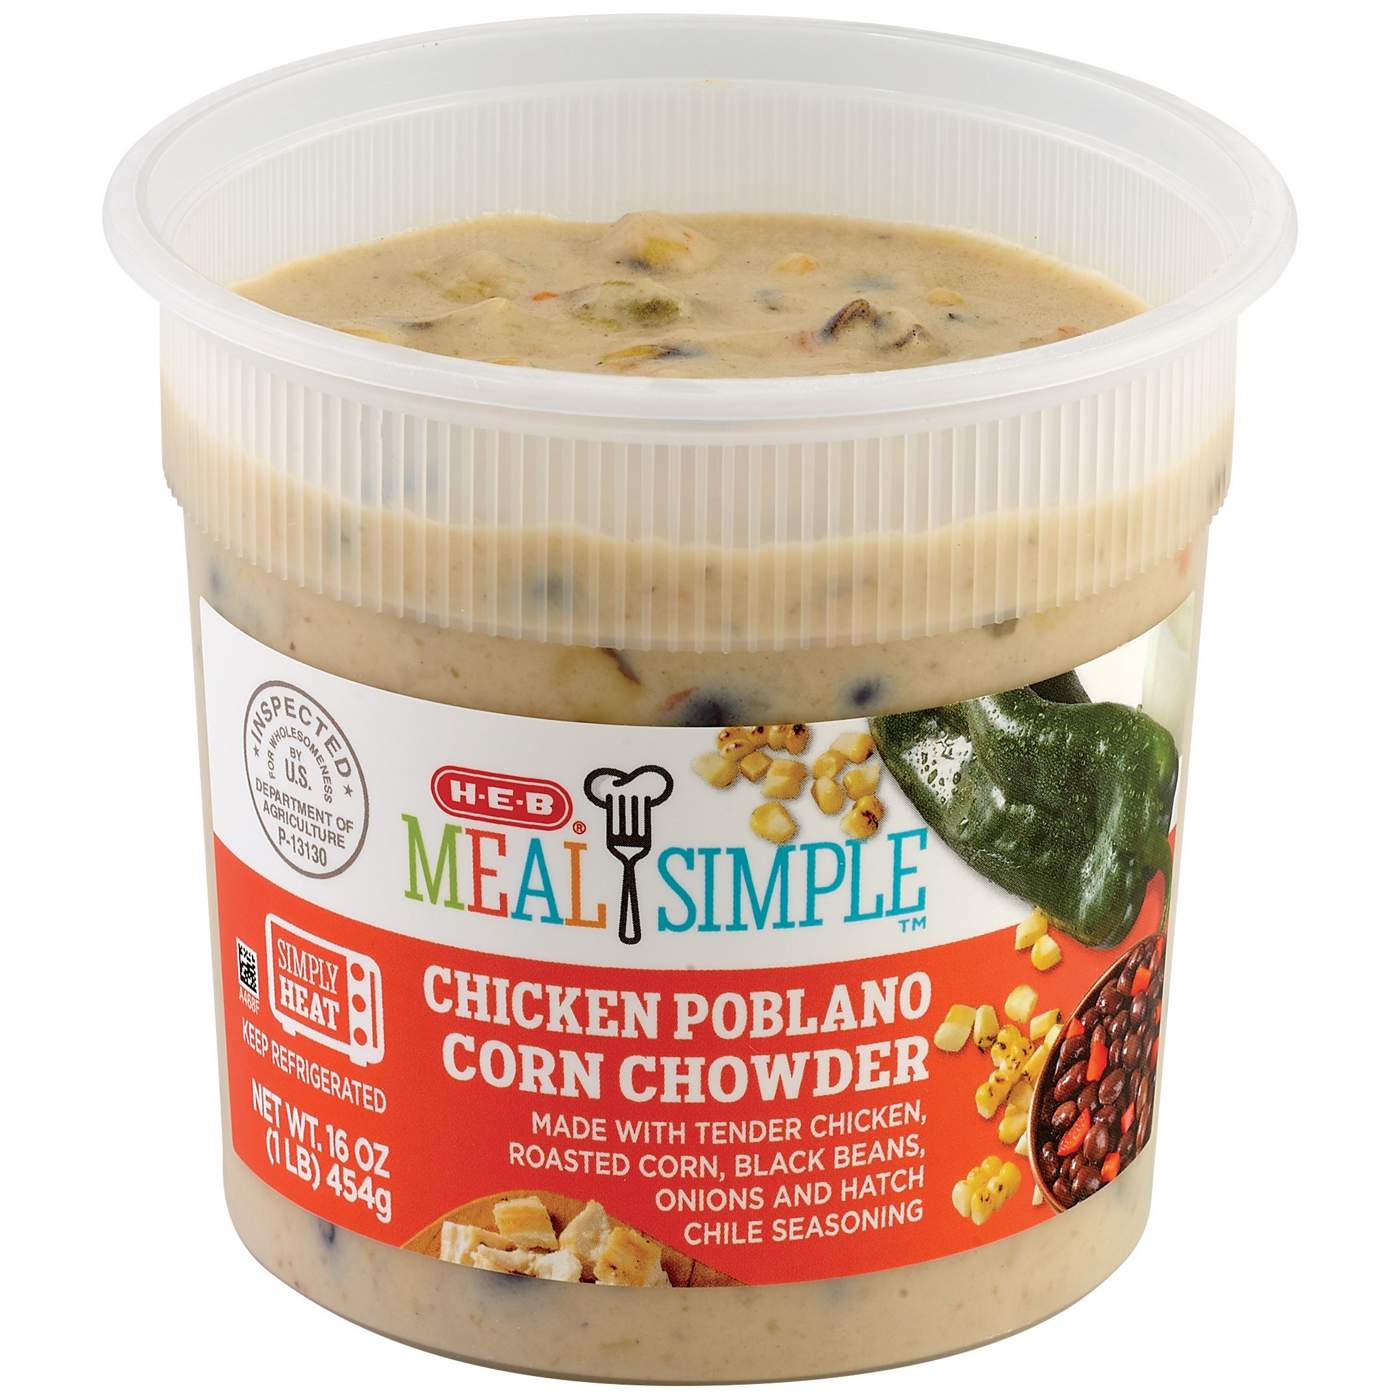 Meal Simple by H-E-B Chicken Poblano Corn Chowder Soup; image 1 of 3